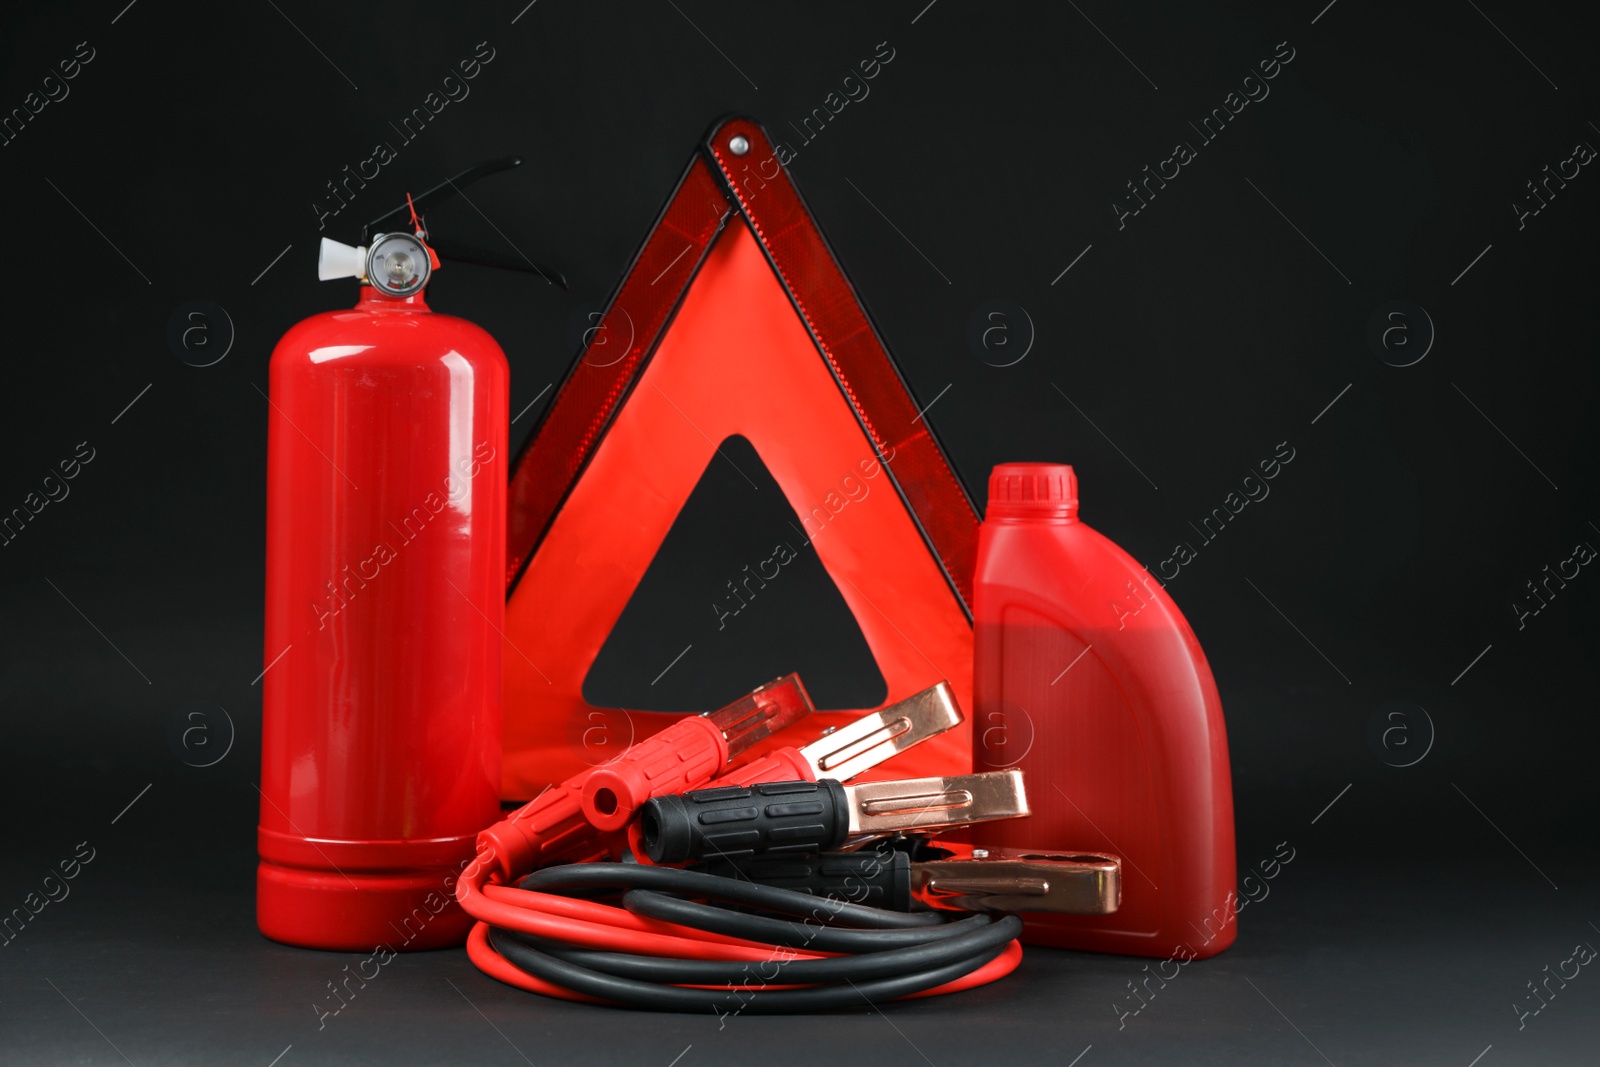 Photo of Emergency warning triangle, red fire extinguisher, battery jumper cables and motor oil on black background. Car safety